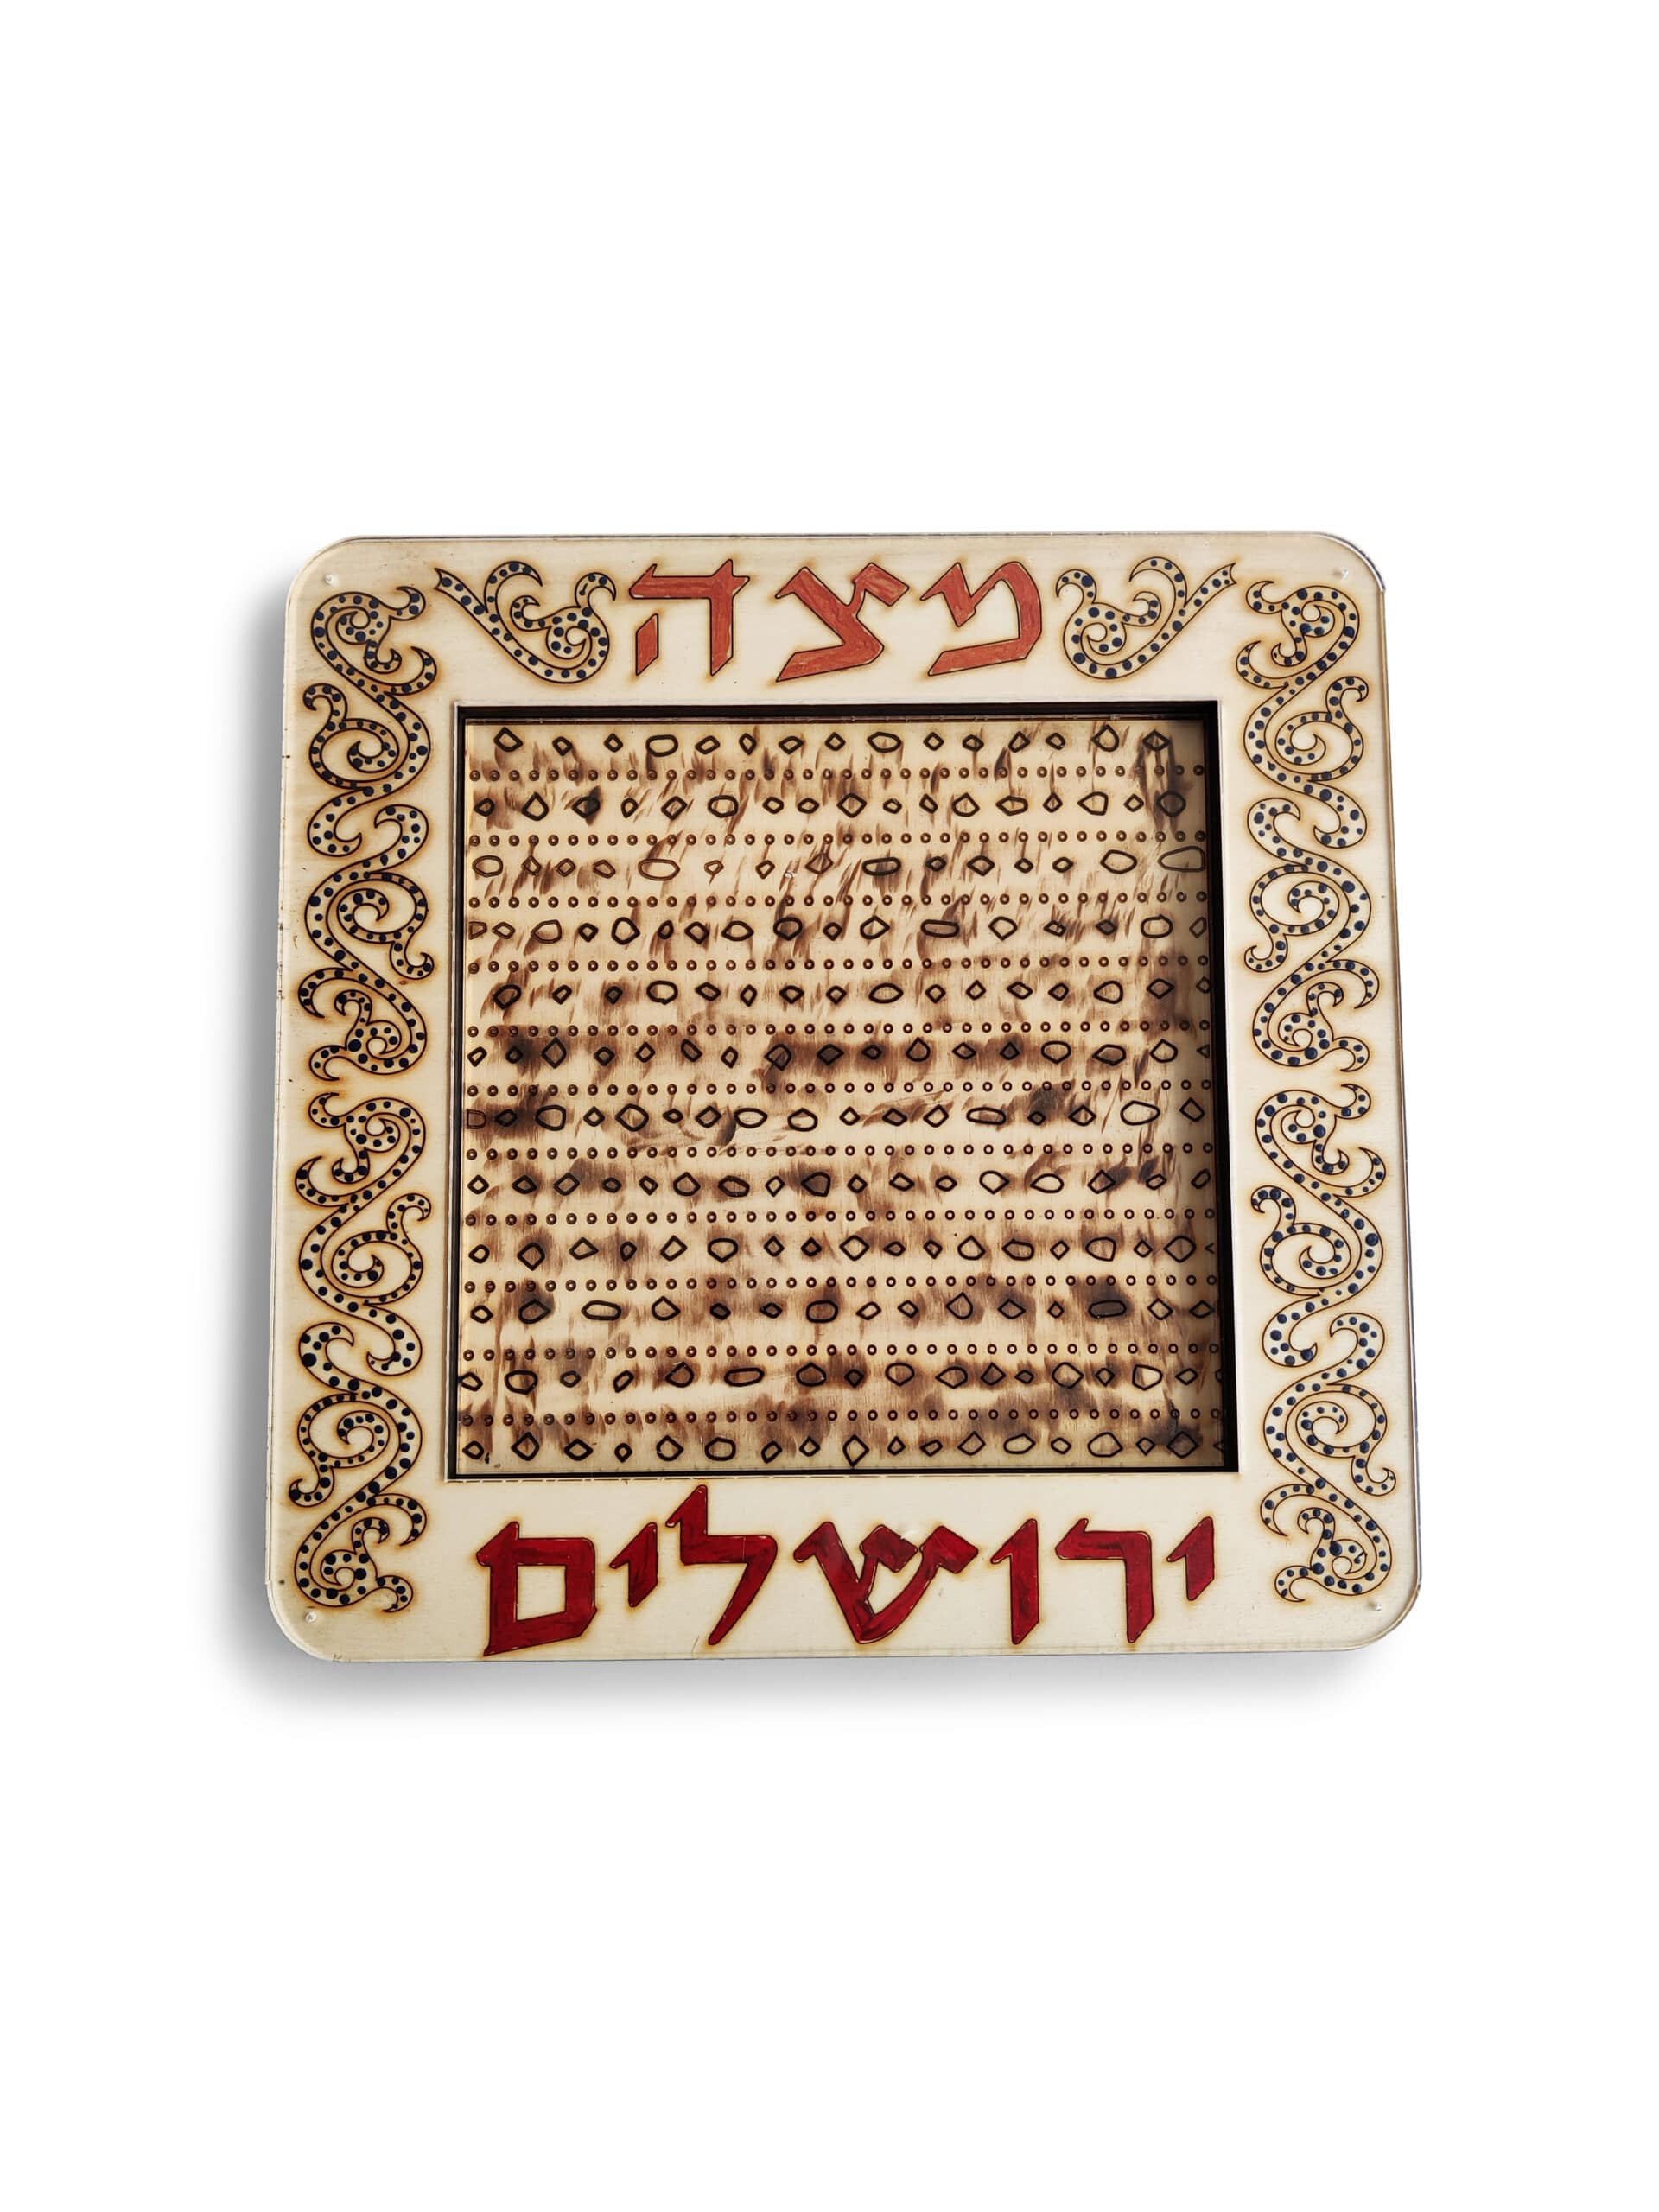 Square Wood Matzah Tray For Pesach Seder